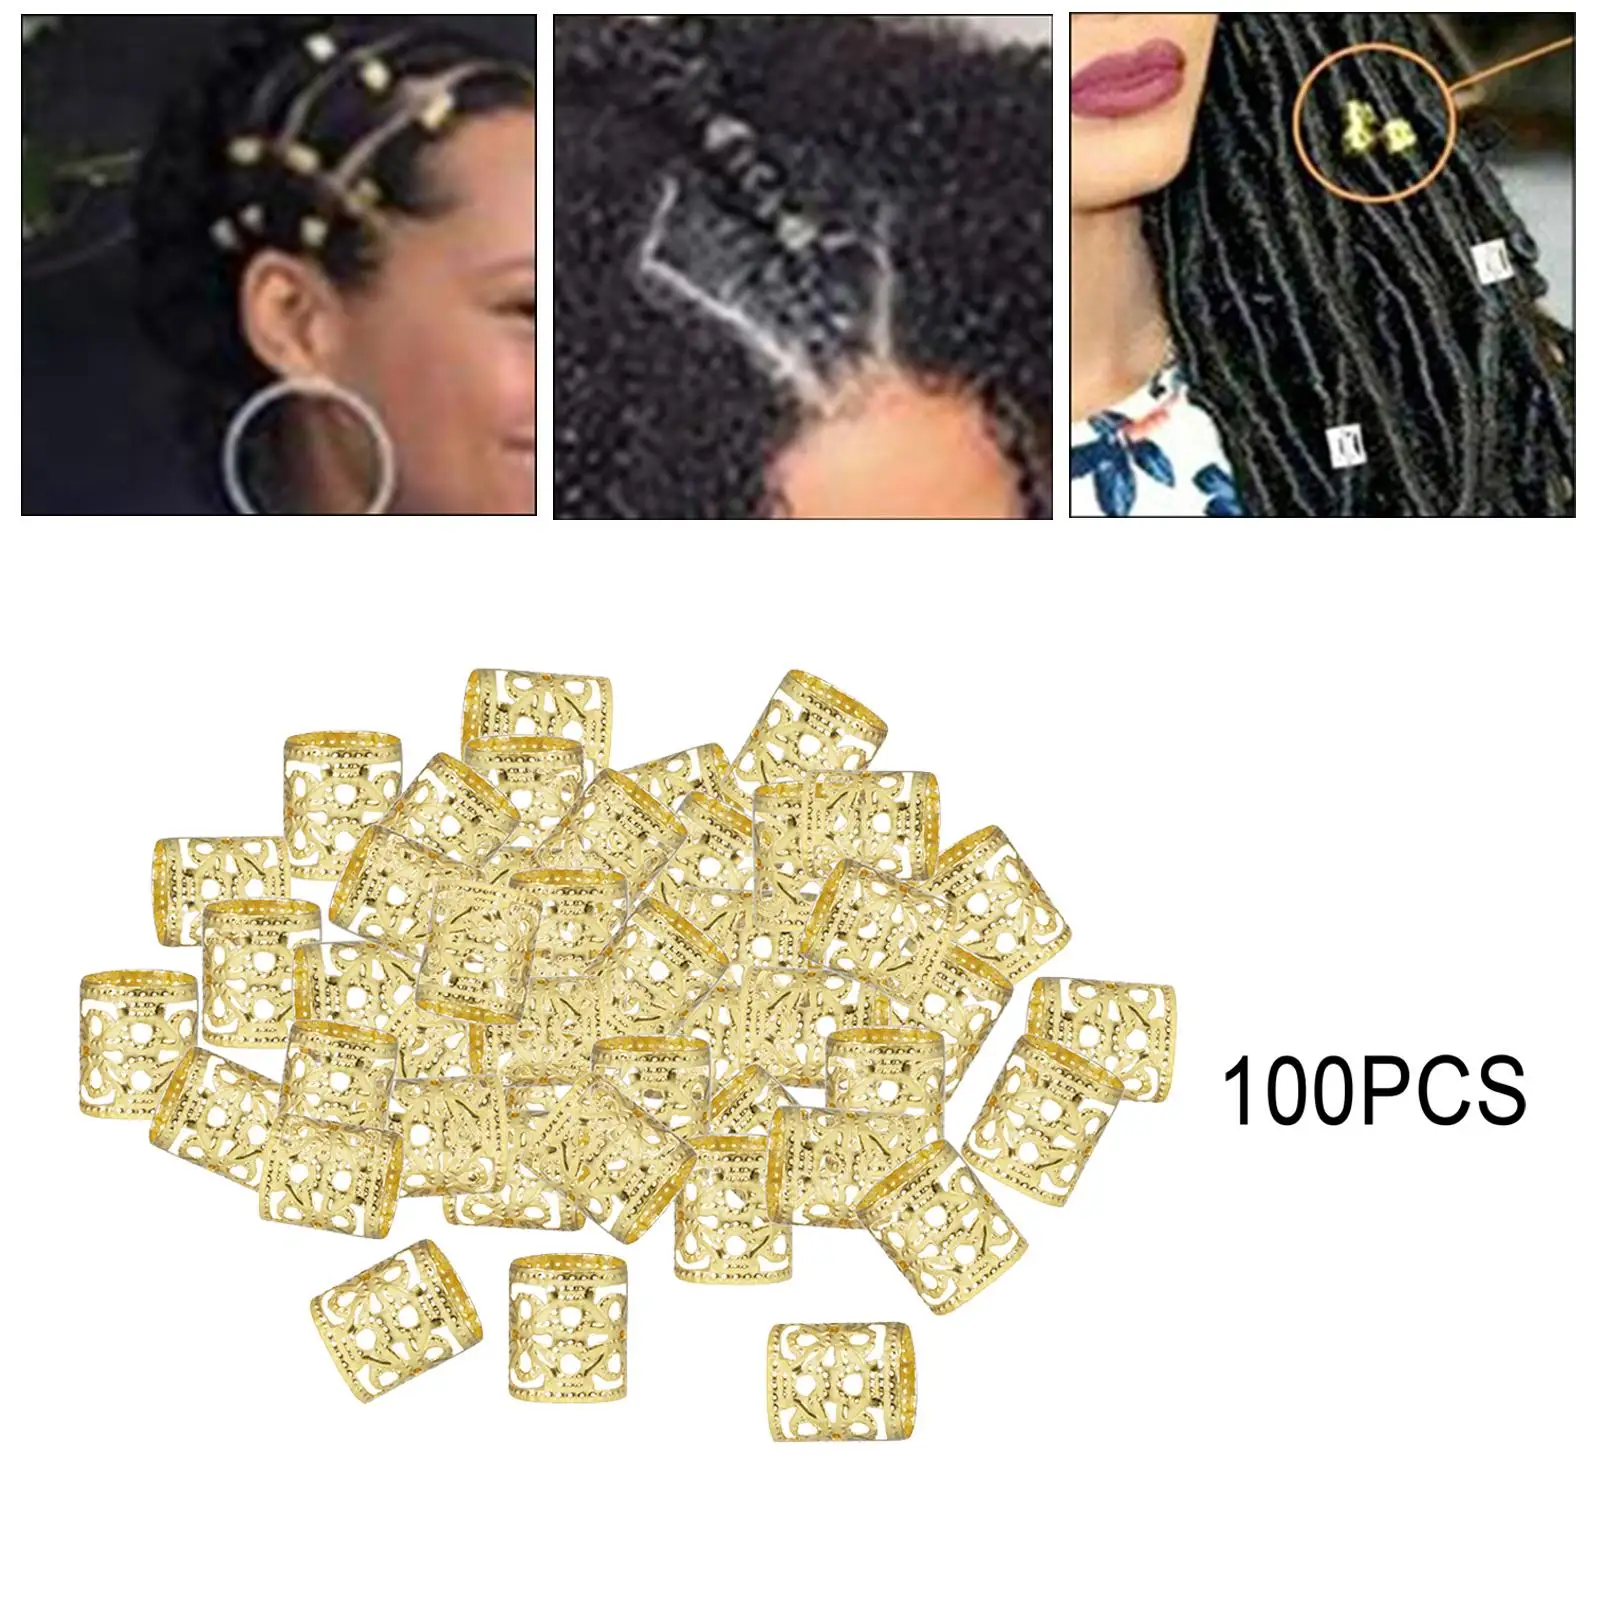 100Pcs Multi Color Dirty Hair Extension Buckles Dreadlock Braid Rings Beads Decoration Clips for Braiding Hair Extension